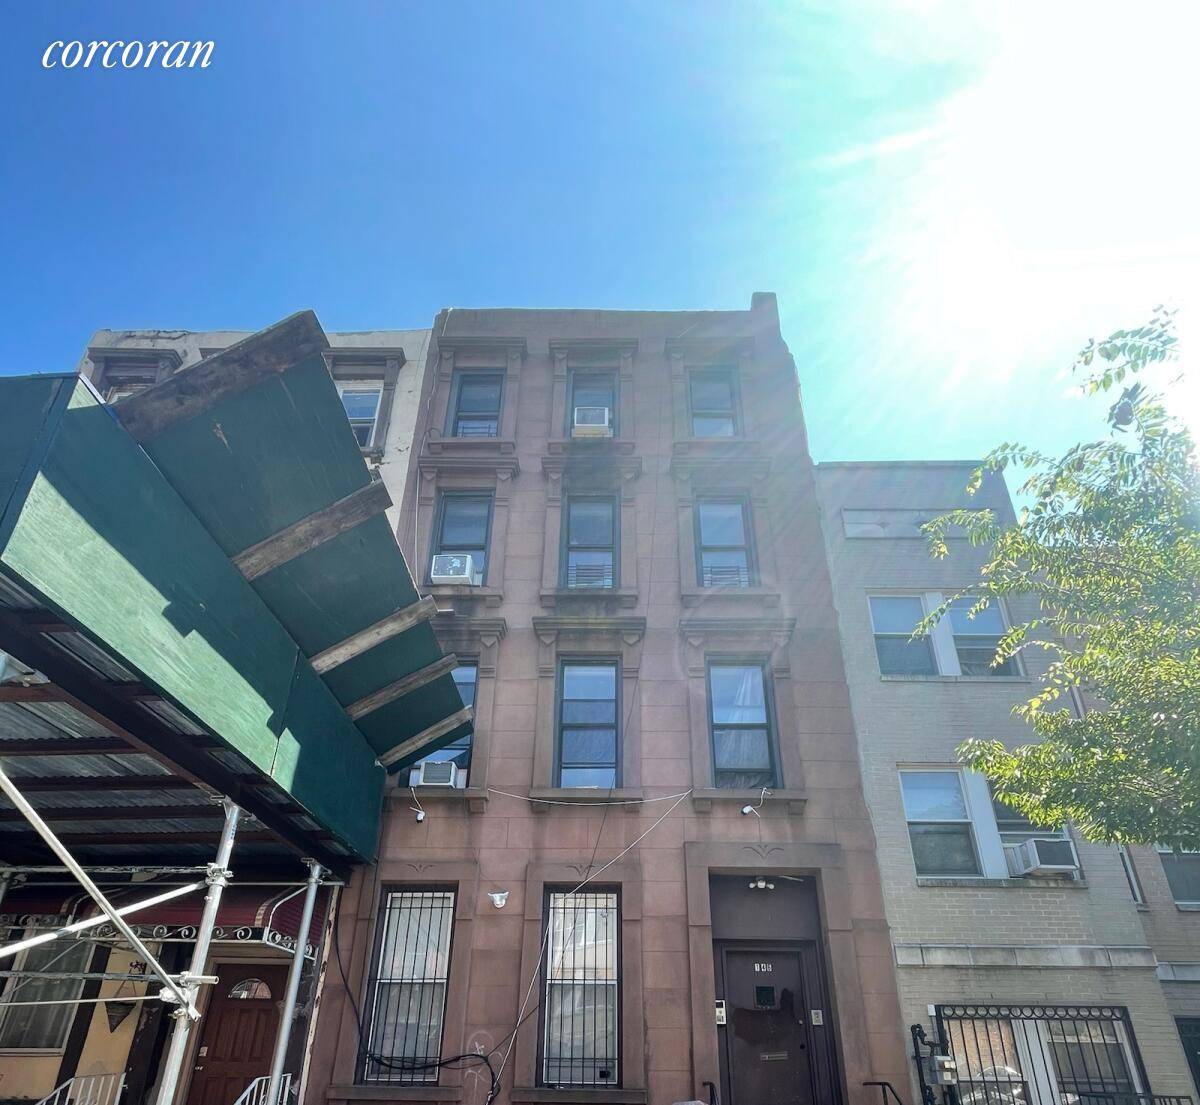 Great Location 146 Jefferson ave Delivered Vacant Four unit huge brownstone bldg Sold as is Condition minutes away from the A C trains at Nostrand avenue and Bedford avenue, shops ...